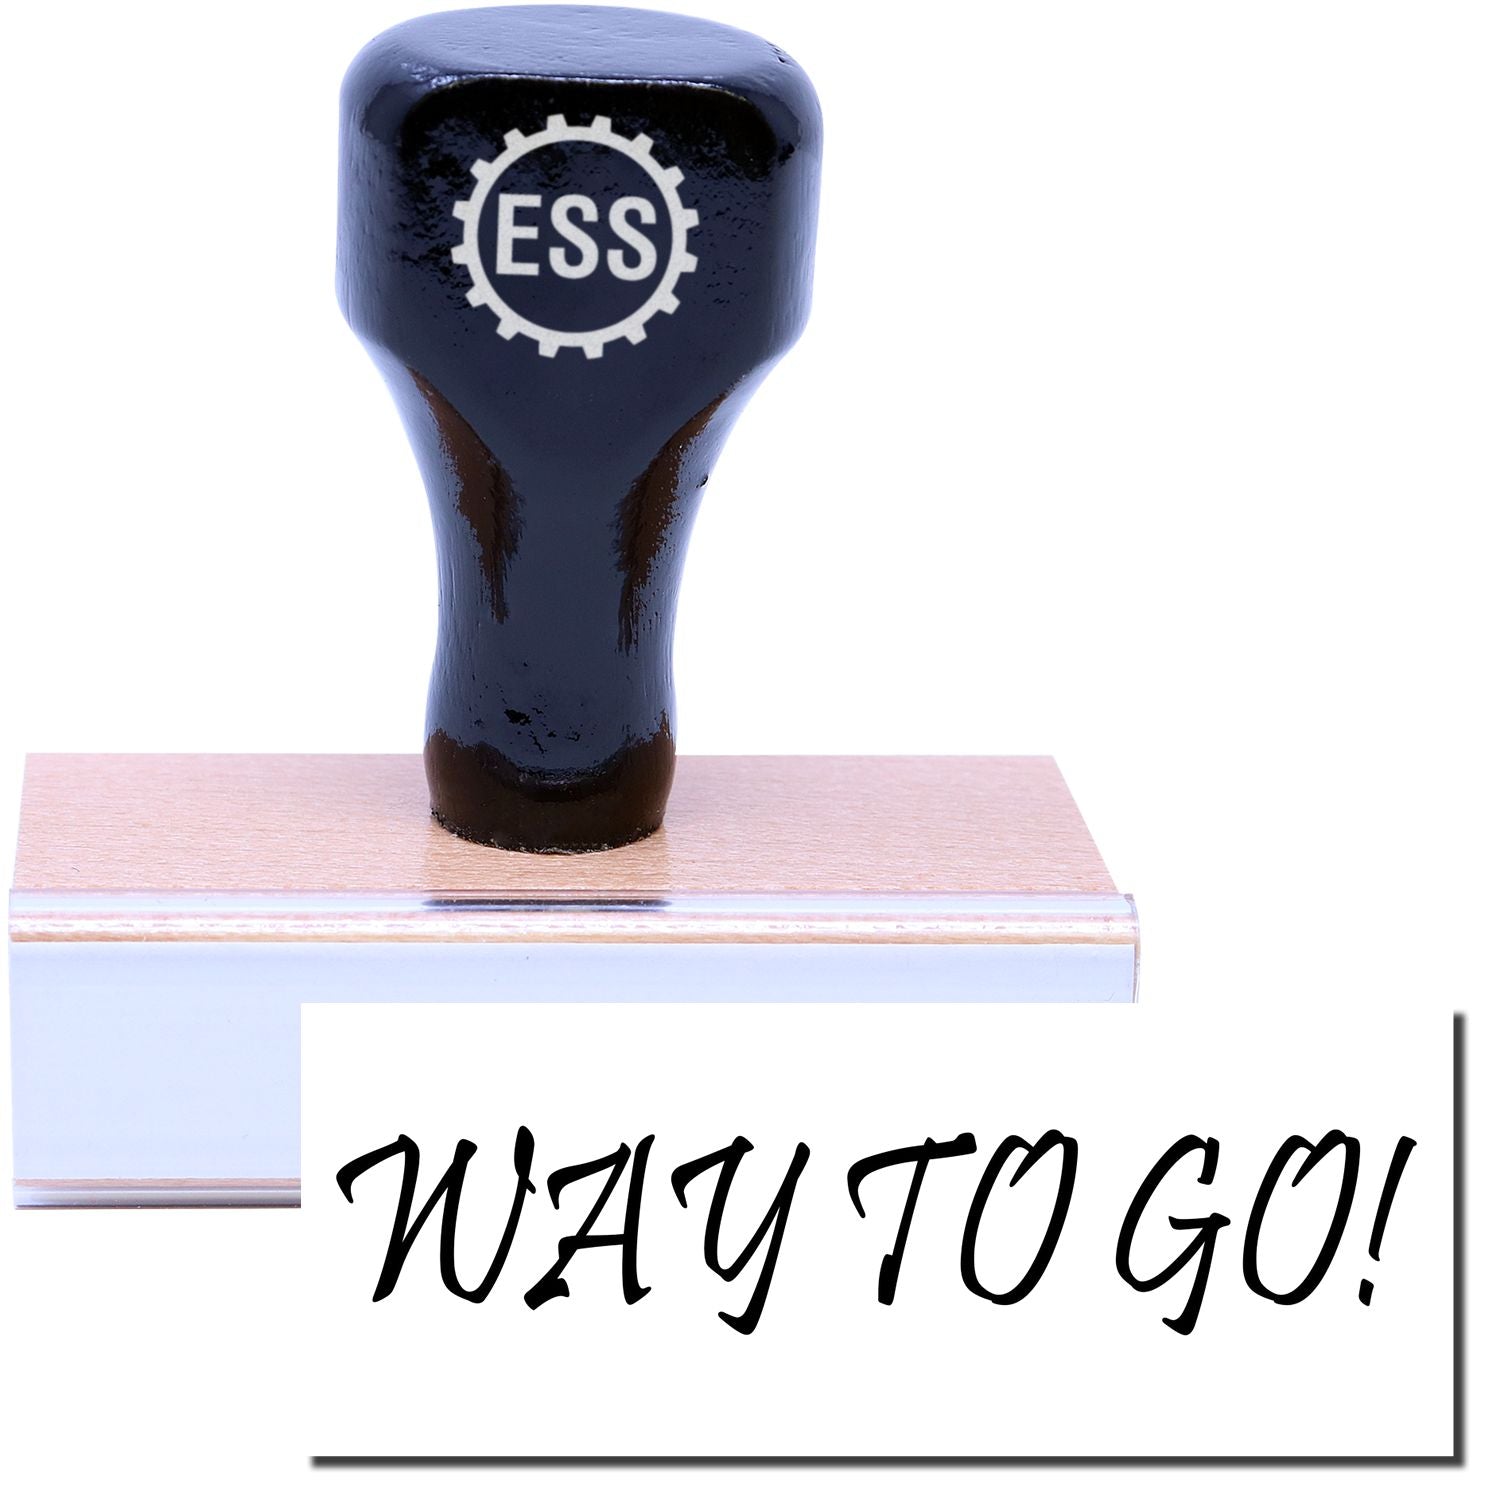 A stock office rubber stamp with a stamped image showing how the text "WAY TO GO!" in a large font is displayed after stamping.